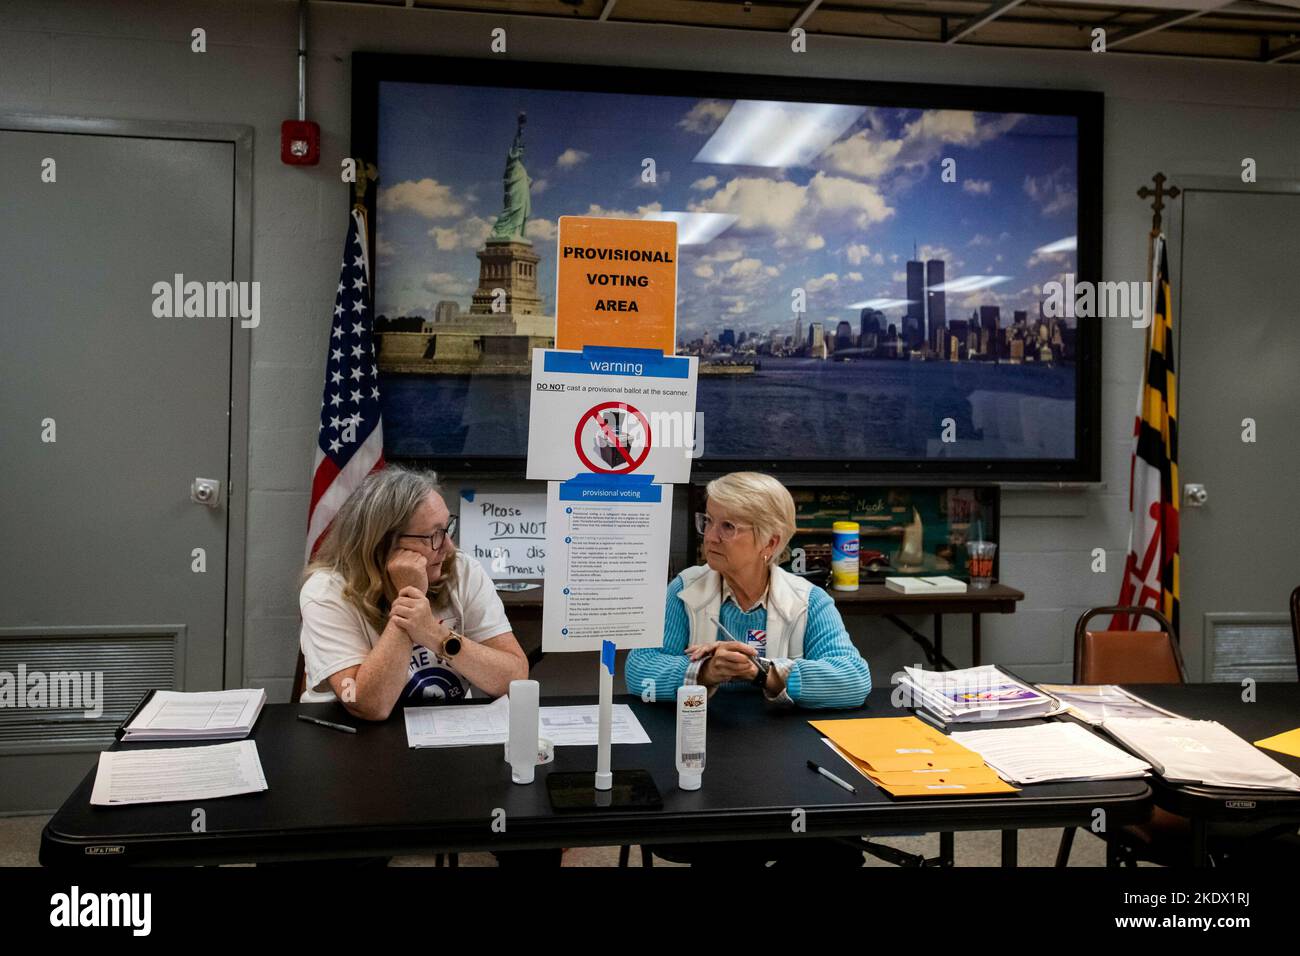 As Americans head to the polls to vote in the 2022 Midterm Elections, volunteer election officials Mary Sobray, left, and Sarah Mullikin, right, wait to assist voters at the Eastport Volunteer Fire Company in Annapolis, Maryland, Tuesday, November 8, 2022. Credit: Rod Lamkey/CNP Stock Photo